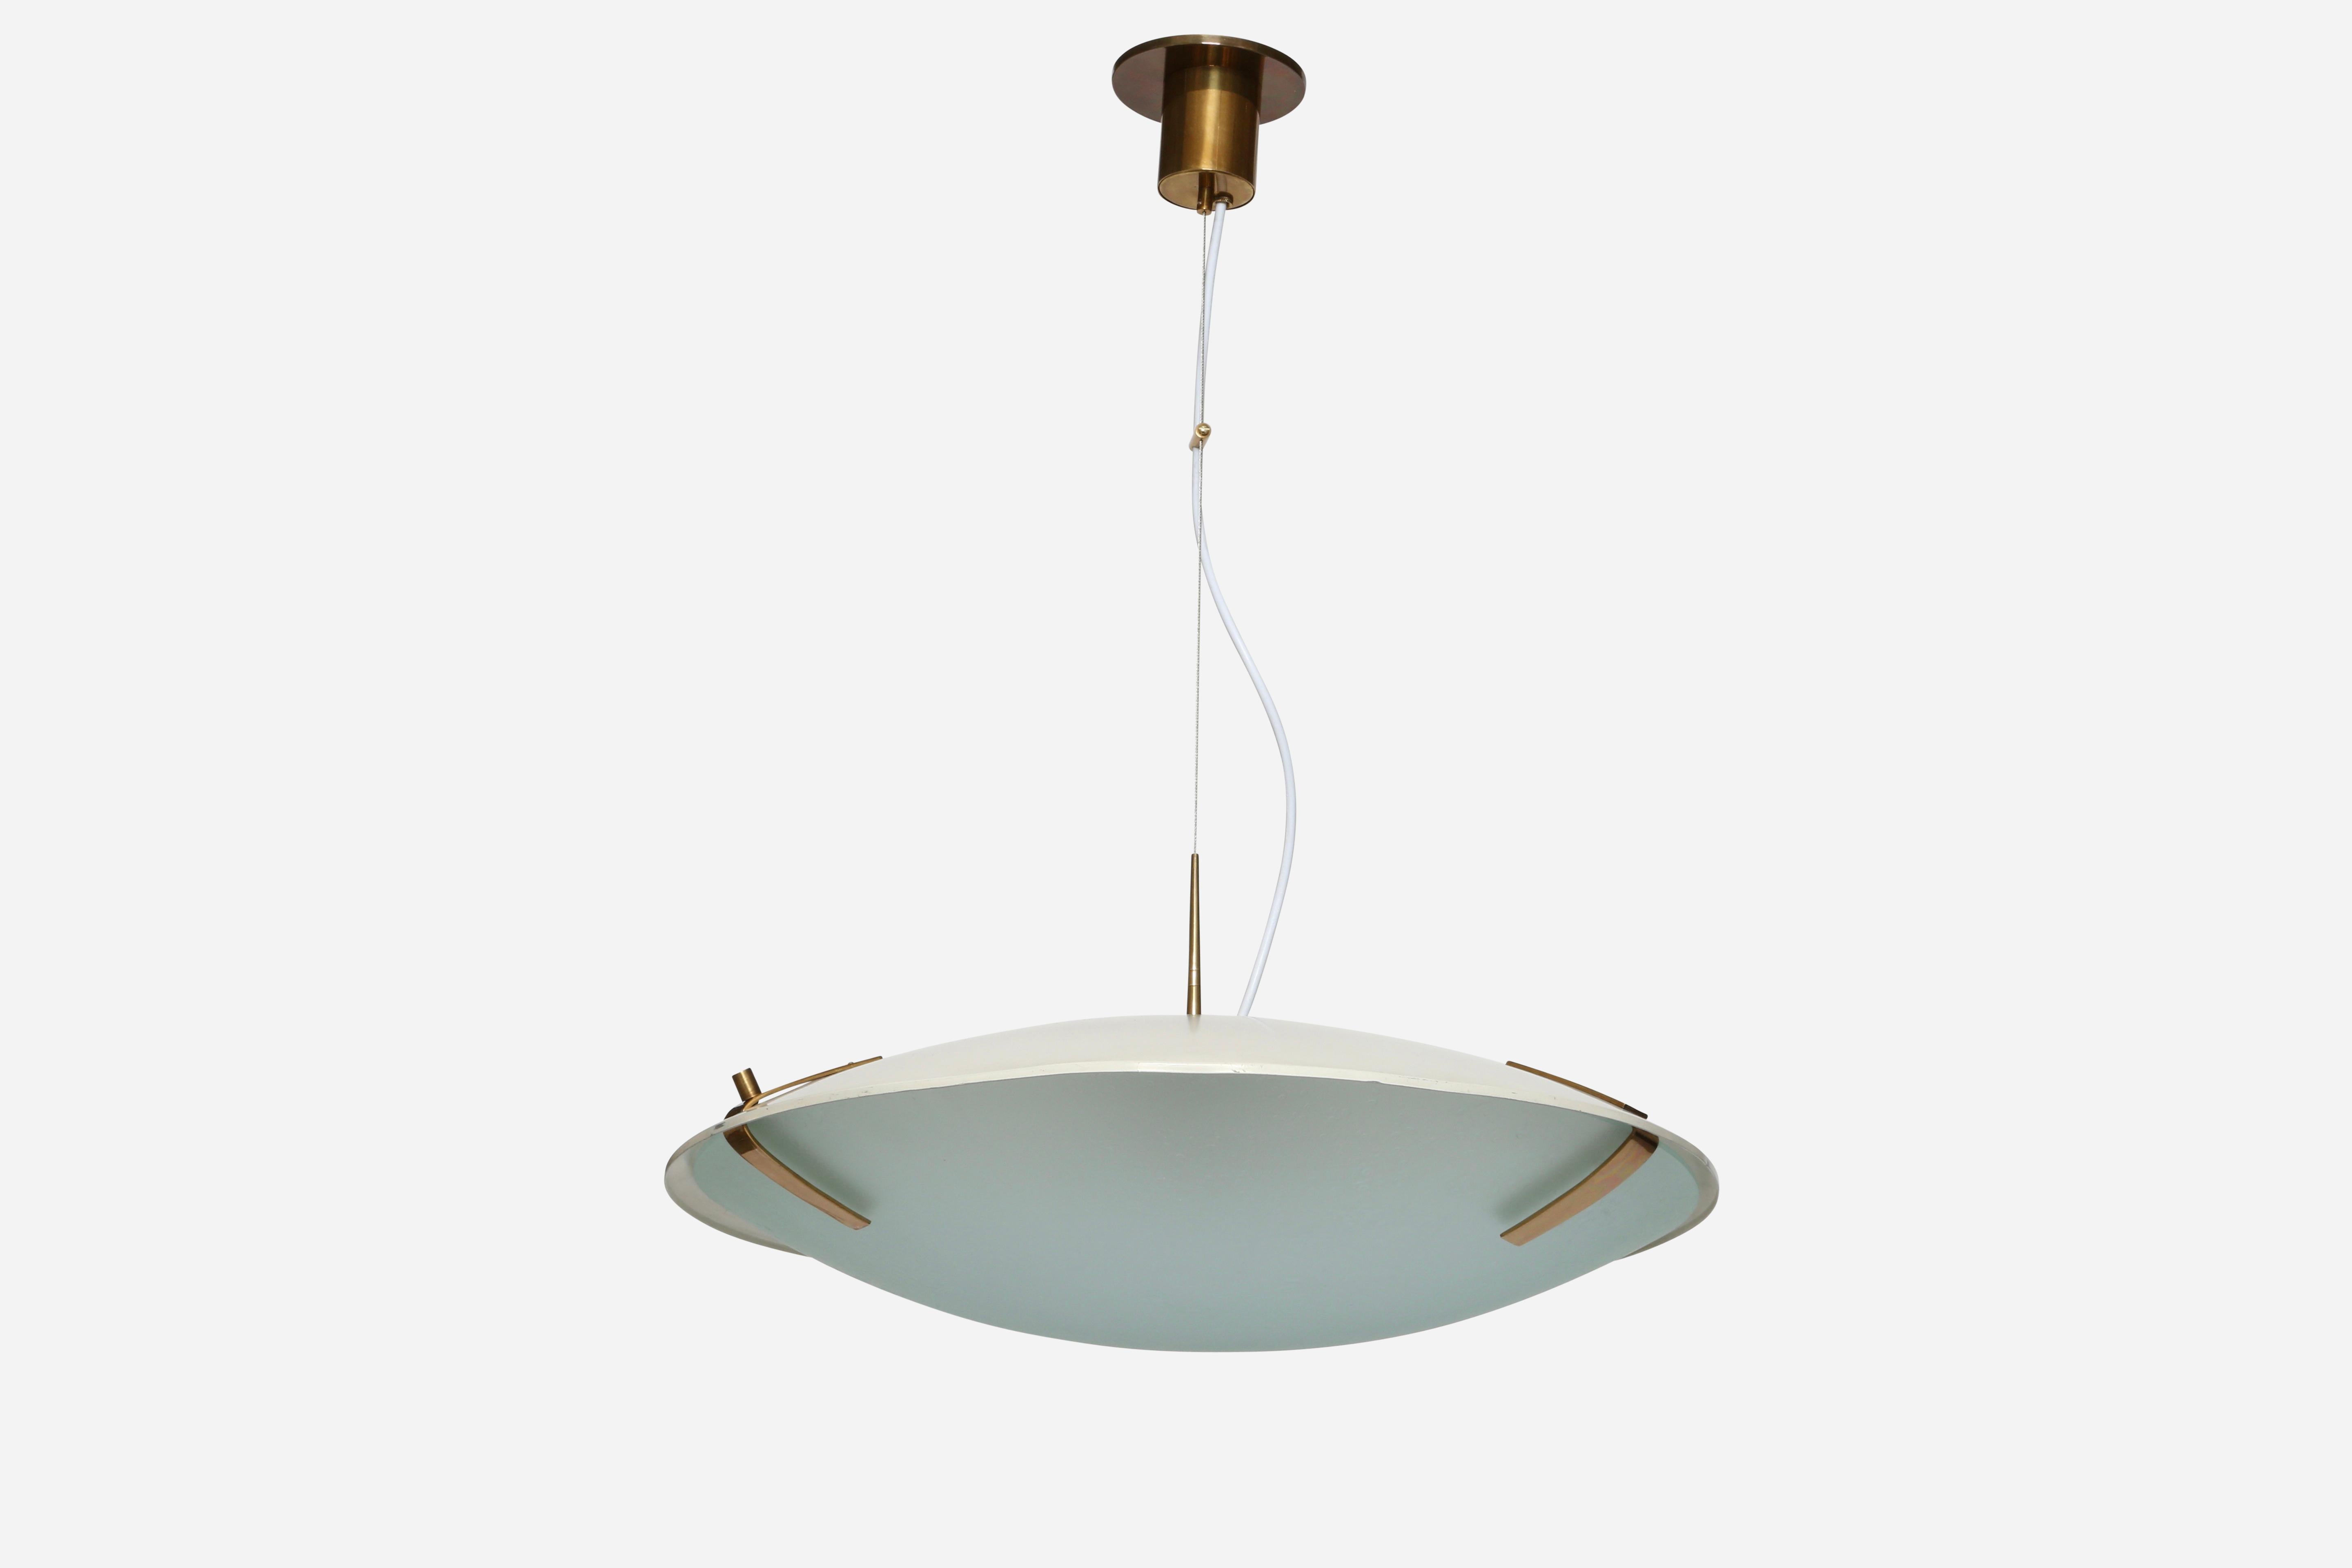 Stilnovo ceiling suspension model 1140.
Designed and made in Italy in 1960s.
Enameled aluminum, textured glass, brass.
Very clean, sculptural forms.
Takes 4 Edison bulbs.
Rewired for US.
Height adjustable.
Height of the fixture's body is 25 inches